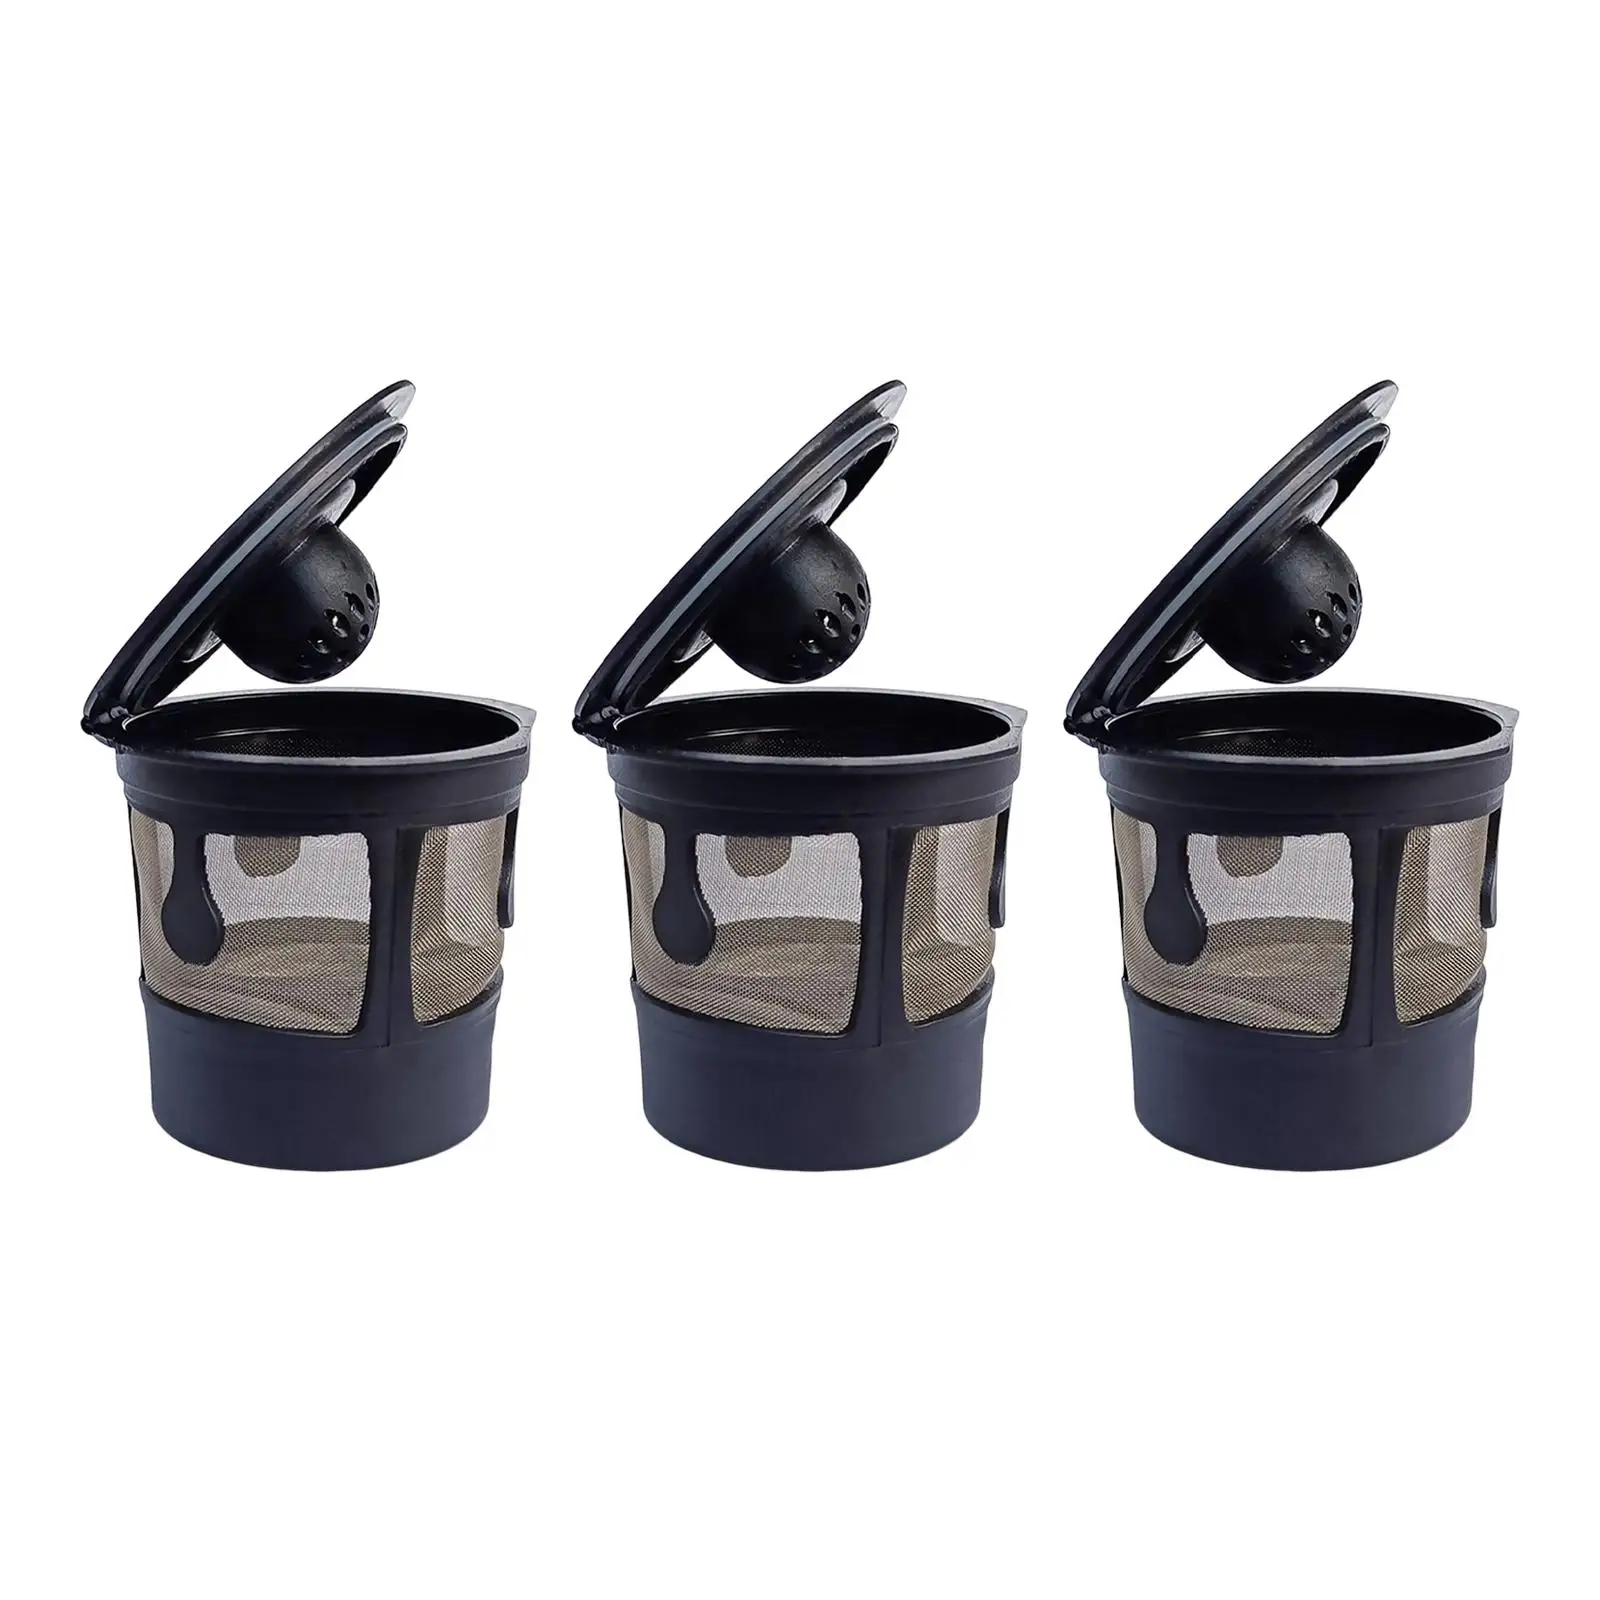 3 Pieces Refillable Coffee Filter Cup Reusable Essentials Easy to to Install Coffee Capsules for Kitchen Cafe Home